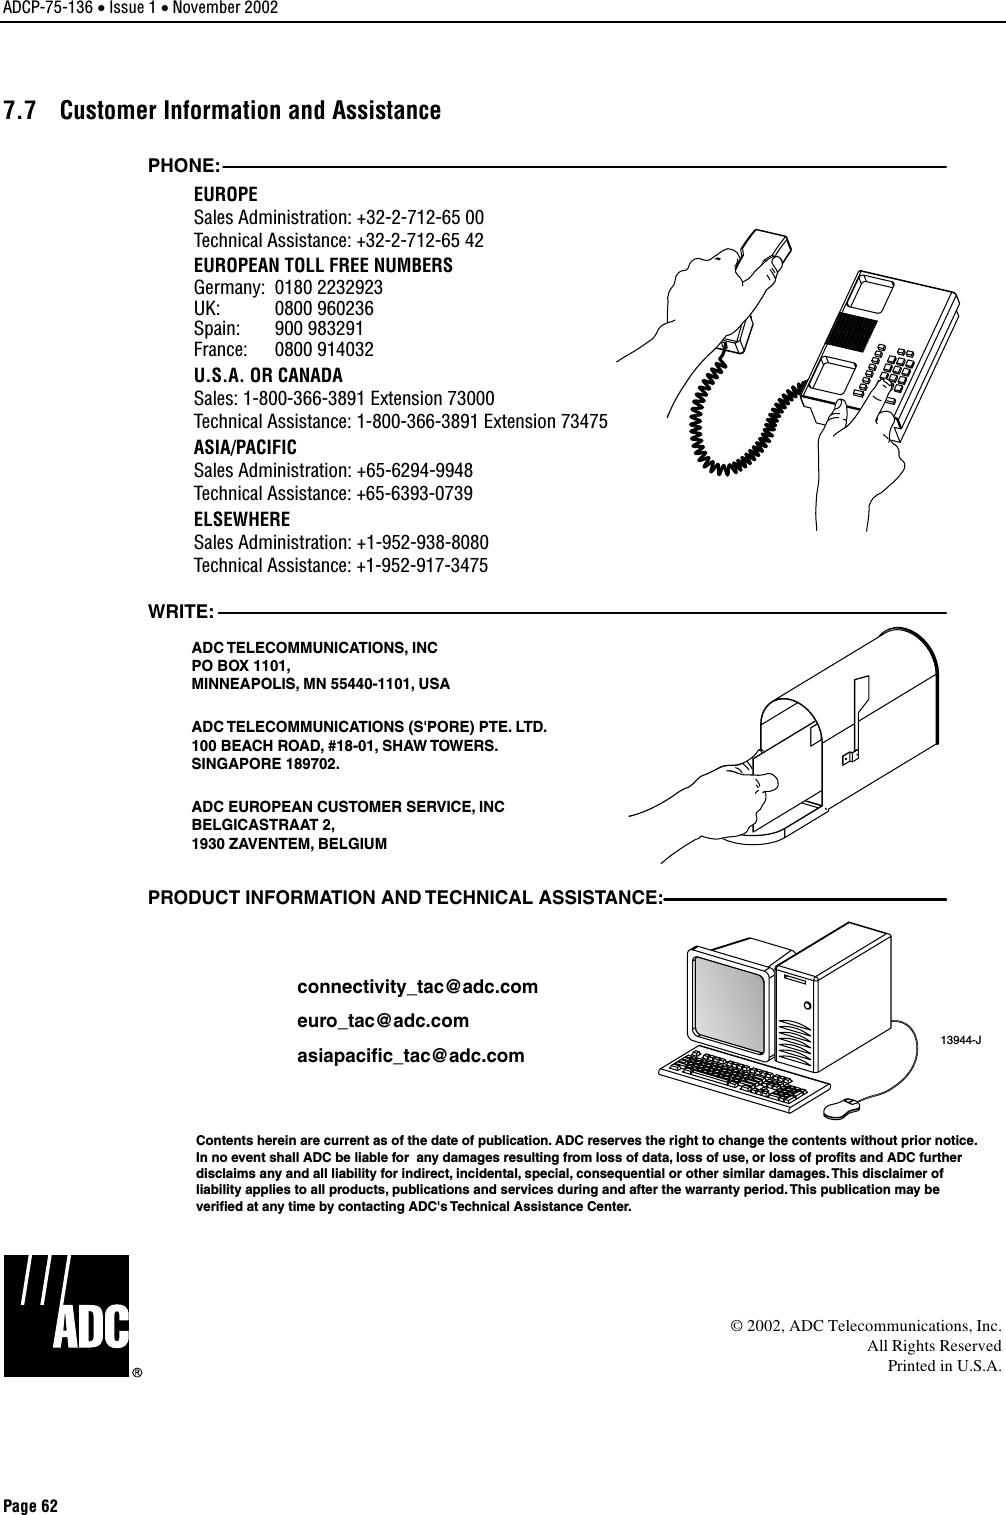 ADCP-75-136 • Issue 1 • November 2002 Page 62 7.7  Customer Information and Assistance 13944-JWRITE:ADC TELECOMMUNICATIONS, INCPO BOX 1101,MINNEAPOLIS, MN 55440-1101, USAADC TELECOMMUNICATIONS (S&apos;PORE) PTE. LTD.100 BEACH ROAD, #18-01, SHAW TOWERS.SINGAPORE 189702.ADC EUROPEAN CUSTOMER SERVICE, INCBELGICASTRAAT 2,1930 ZAVENTEM, BELGIUMPHONE:EUROPESales Administration: +32-2-712-65 00Technical Assistance: +32-2-712-65 42EUROPEAN TOLL FREE NUMBERSUK: 0800 960236Spain: 900 983291France: 0800 914032Germany: 0180 2232923U.S.A. OR CANADASales: 1-800-366-3891 Extension 73000Technical Assistance: 1-800-366-3891 Extension 73475ASIA/PACIFICSales Administration: +65-6294-9948Technical Assistance: +65-6393-0739ELSEWHERESales Administration: +1-952-938-8080Technical Assistance: +1-952-917-3475PRODUCT INFORMATION AND TECHNICAL ASSISTANCE:Contents herein are current as of the date of publication. ADC reserves the right to change the contents without prior notice.In no event shall ADC be liable for  any damages resulting from loss of data, loss of use, or loss of profits and ADC furtherdisclaims any and all liability for indirect, incidental, special, consequential or other similar damages. This disclaimer ofliability applies to all products, publications and services during and after the warranty period. This publication may beverified at any time by contacting ADC&apos;s Technical Assistance Center. euro_tac@adc.comasiapacific_tac@adc.comconnectivity_tac@adc.com©2002, ADC Telecommunications, Inc.All Rights ReservedPrinted in U.S.A.